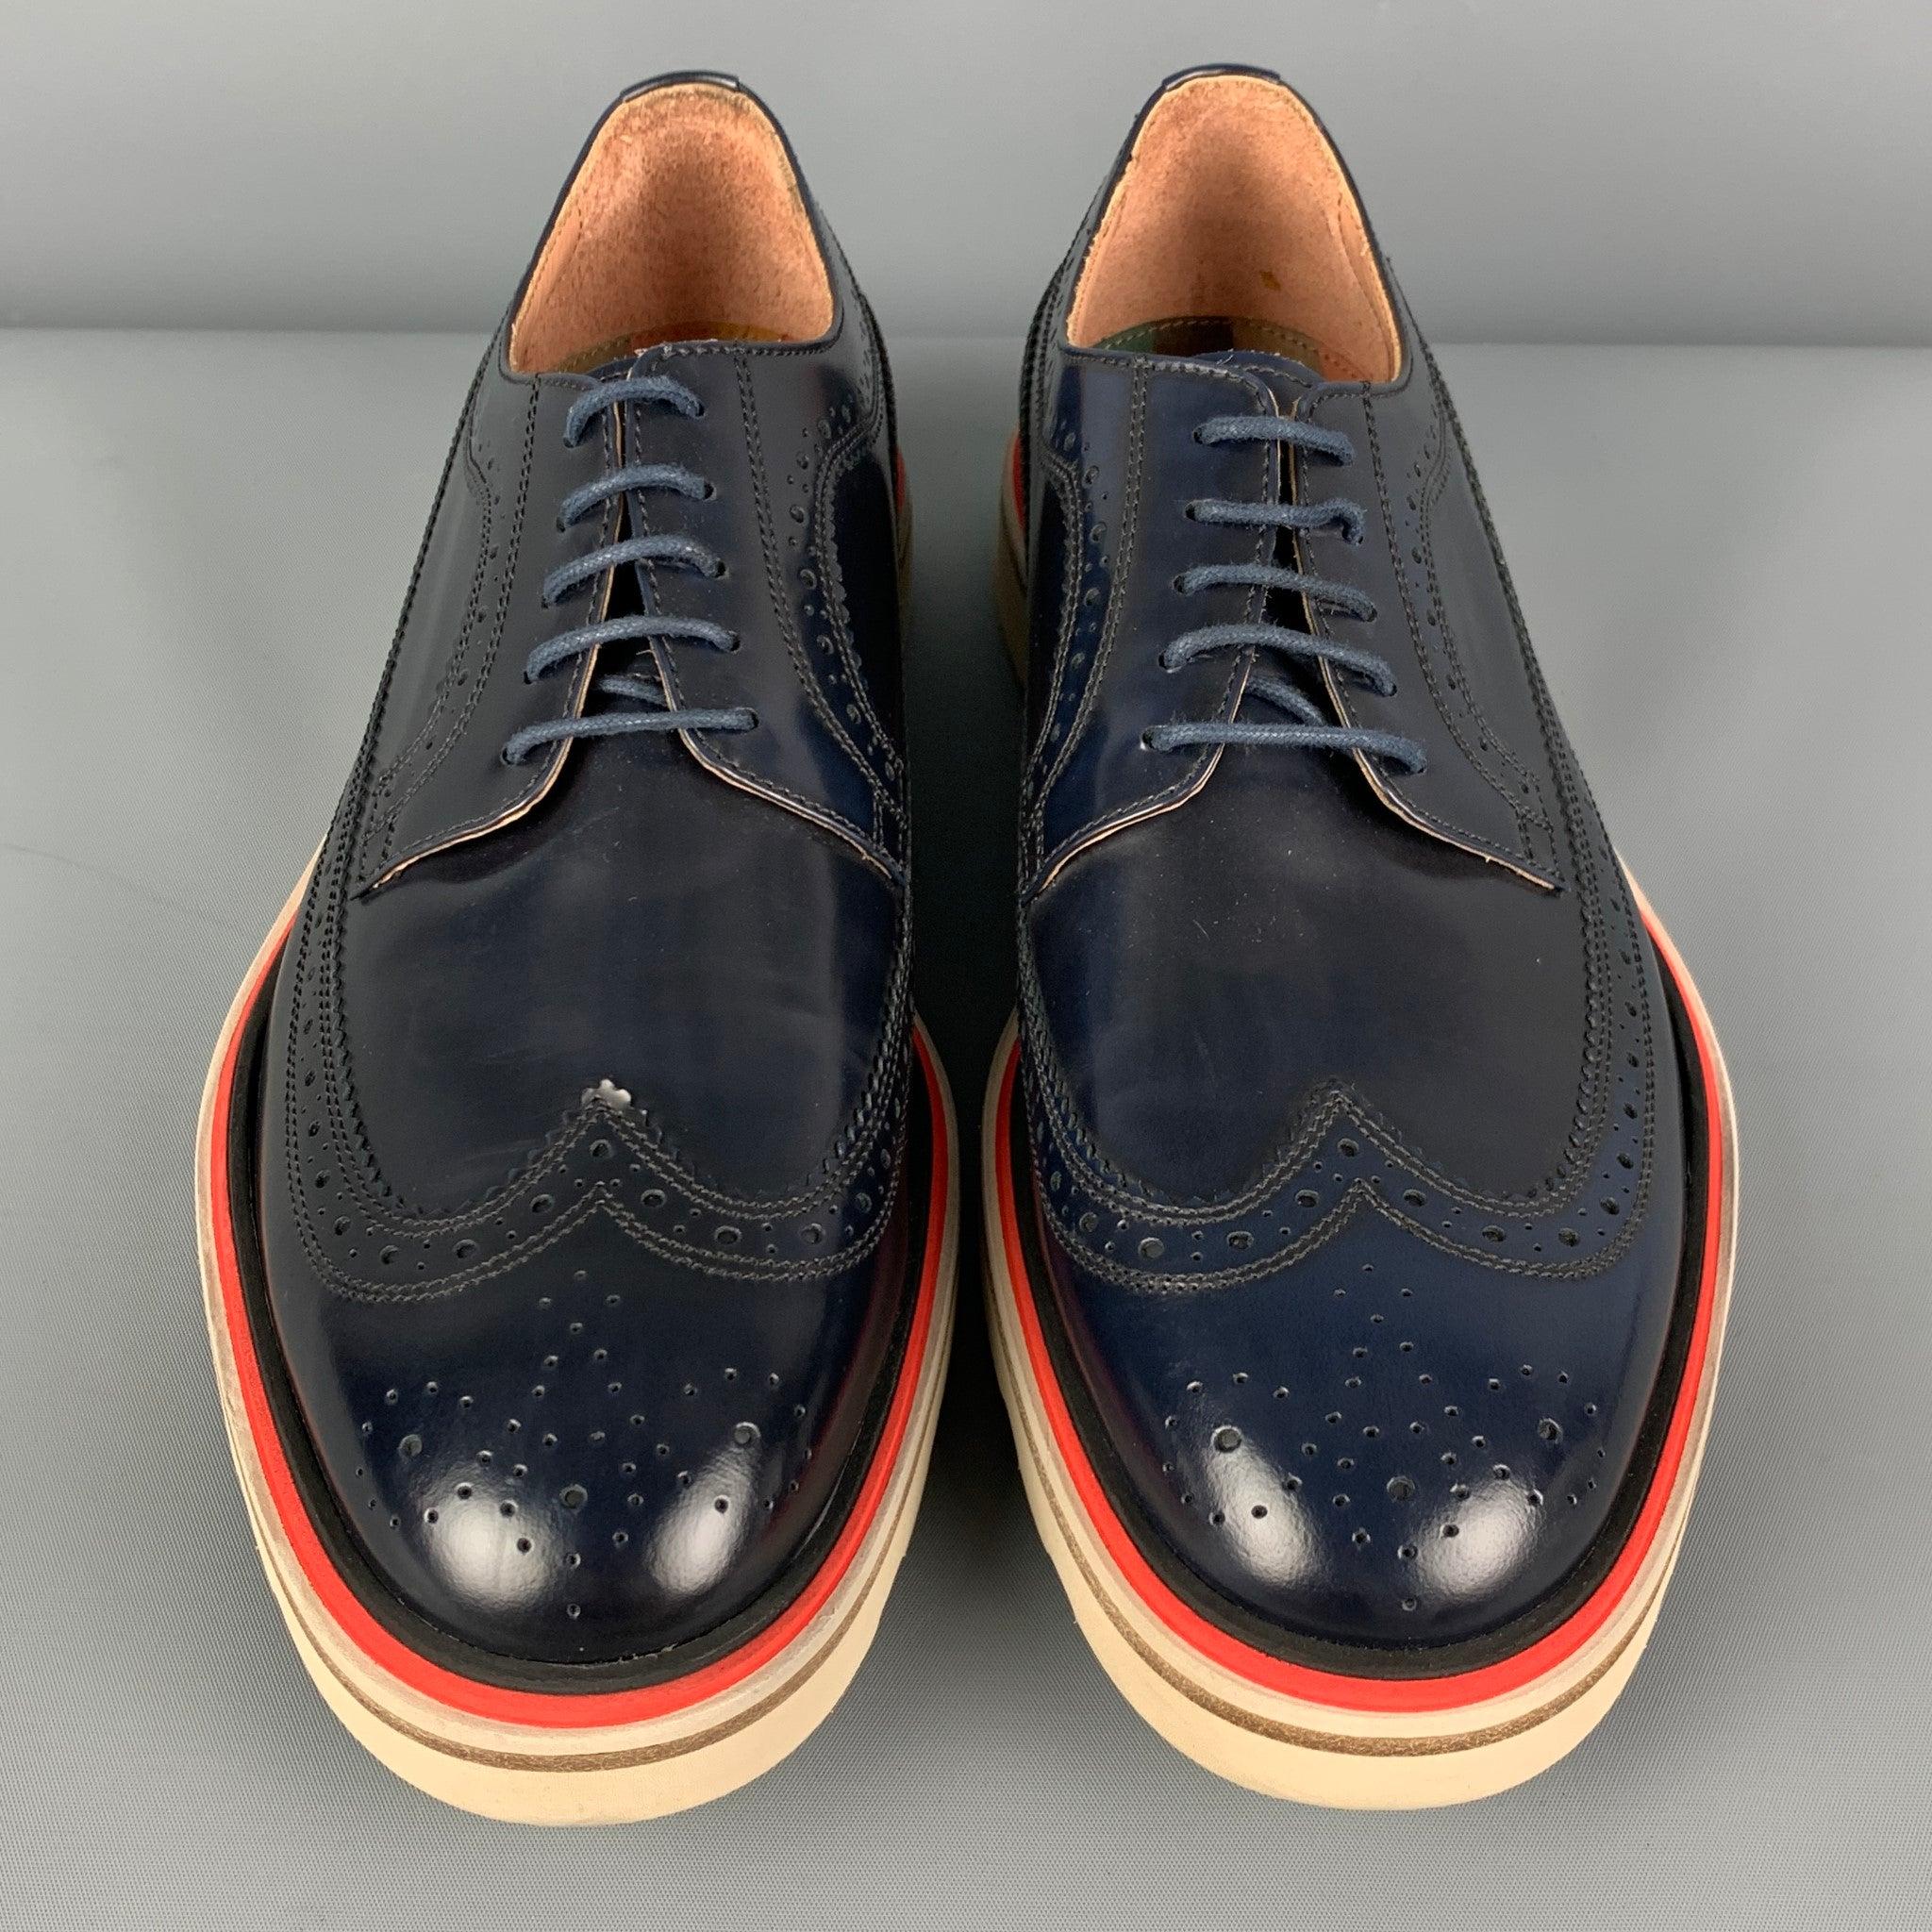 Men's PAUL SMITH Size 7.5 Navy White Perforated Leather Wingtip Lace Up Shoes For Sale